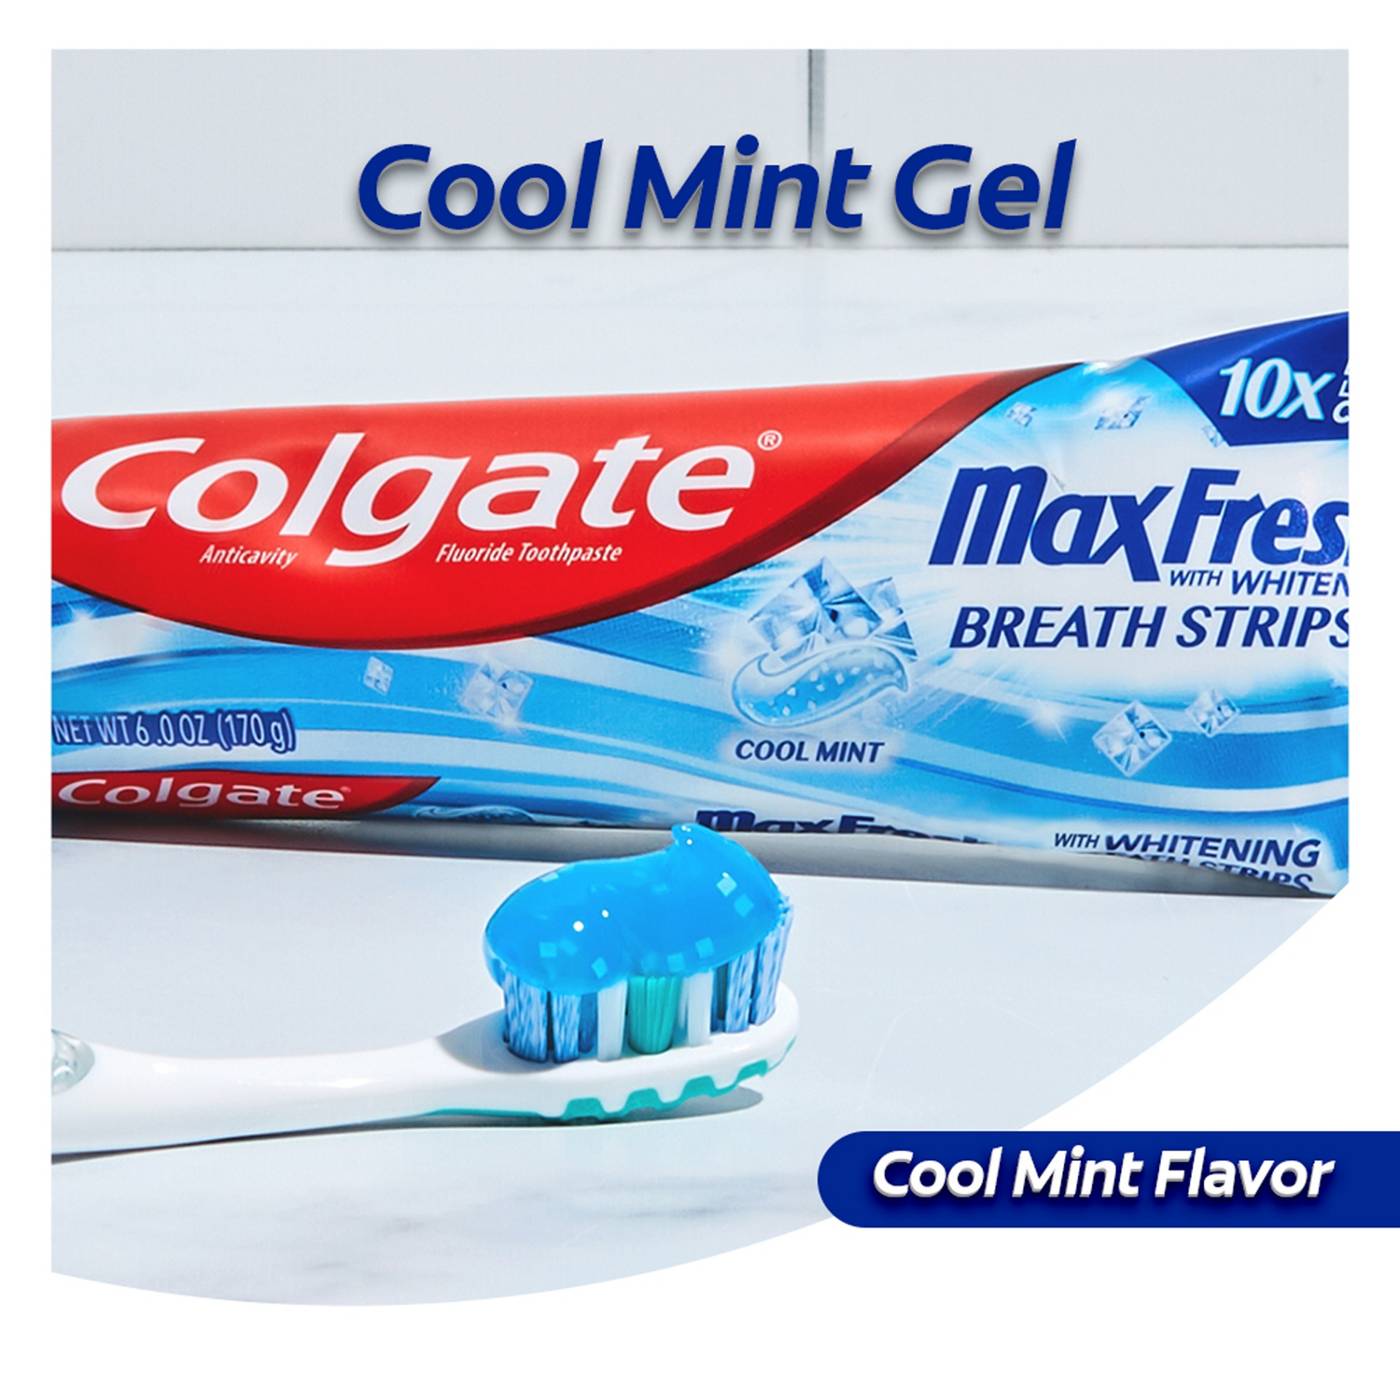 Colgate Max Fresh Anticavity Toothpaste - Cool Mint; image 5 of 15